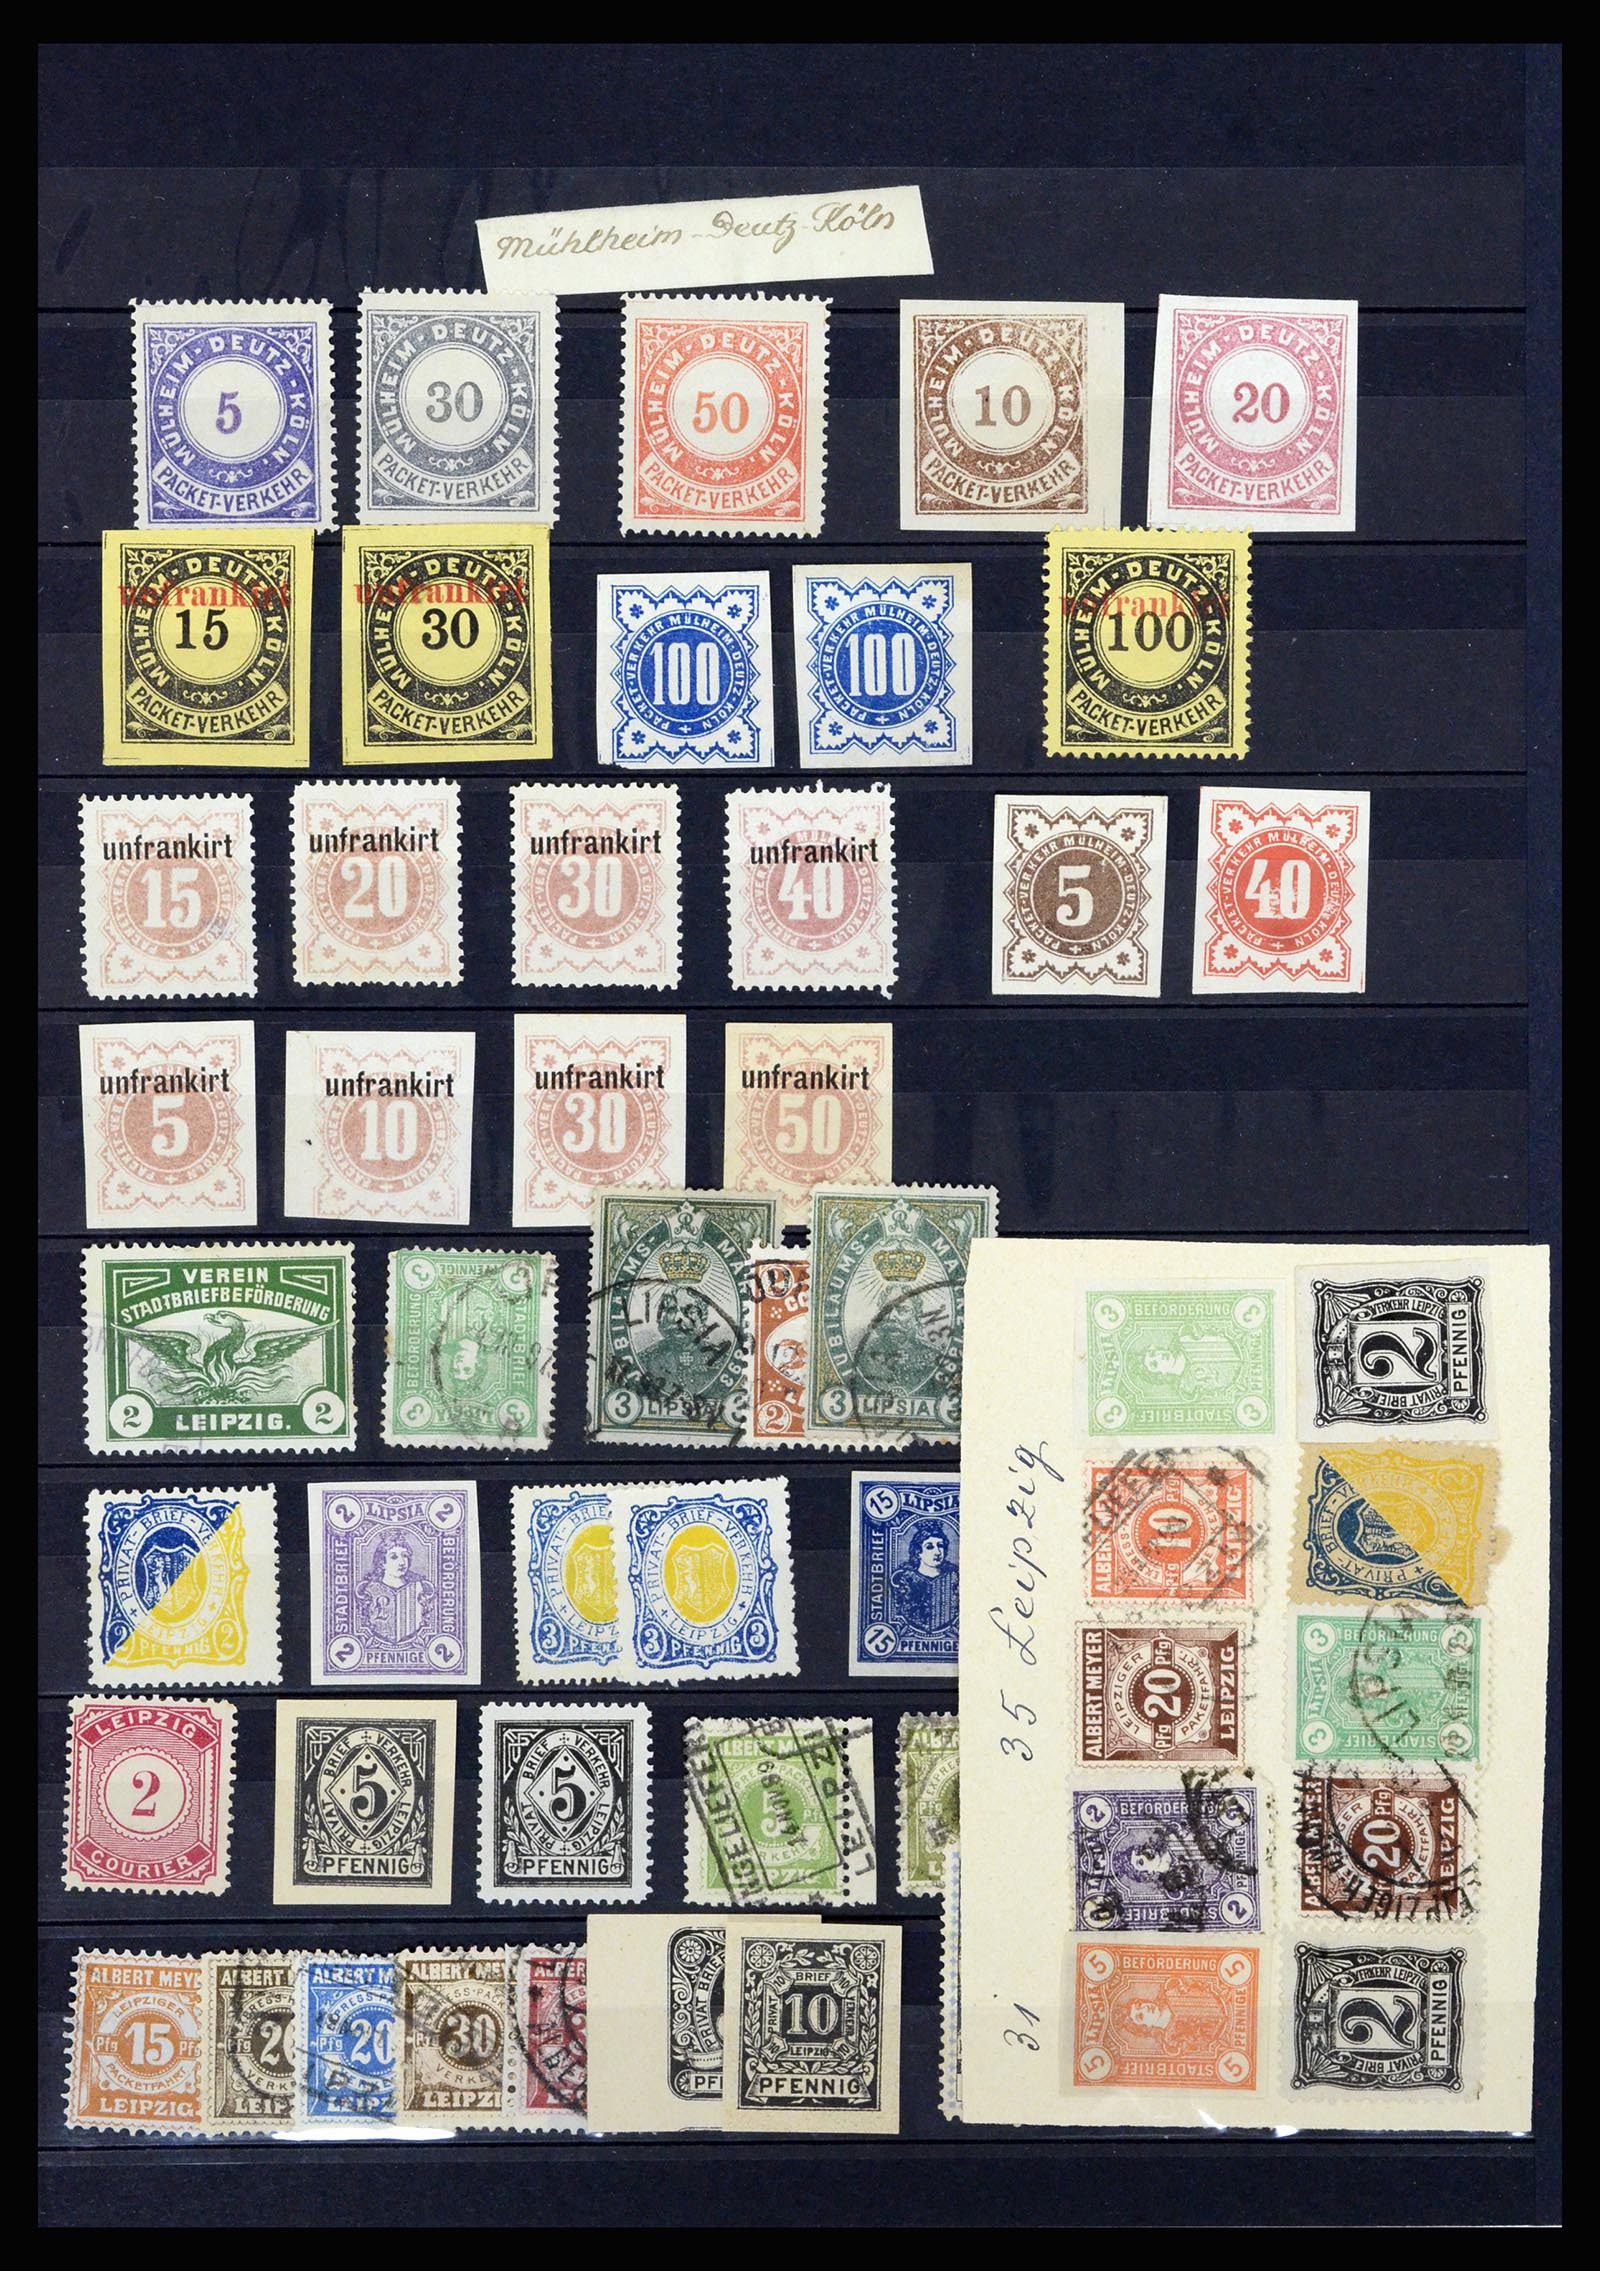 36932 022 - Stamp collection 36932 Germany local post 1884-1900.